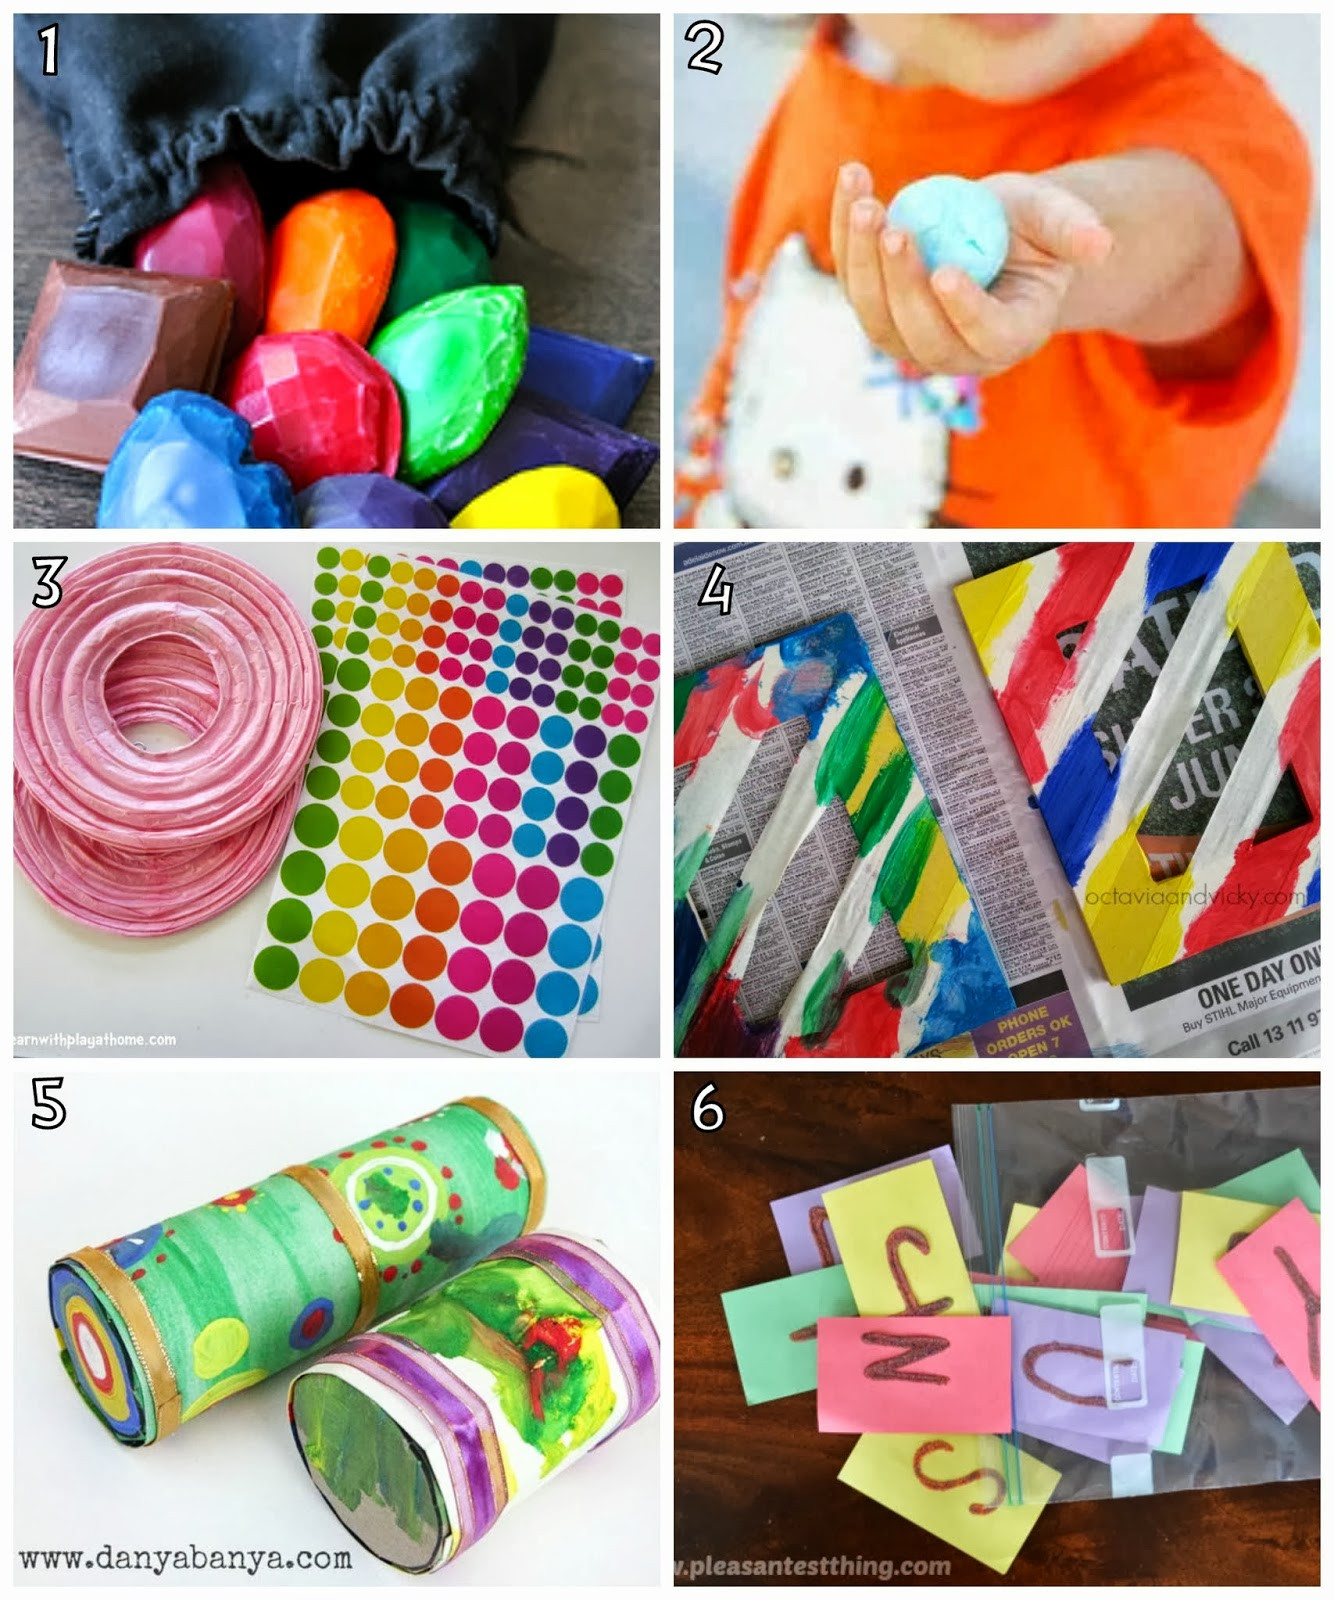 DIY Toddler Activities
 Learn with Play at Home 12 fun DIY Activities for kids